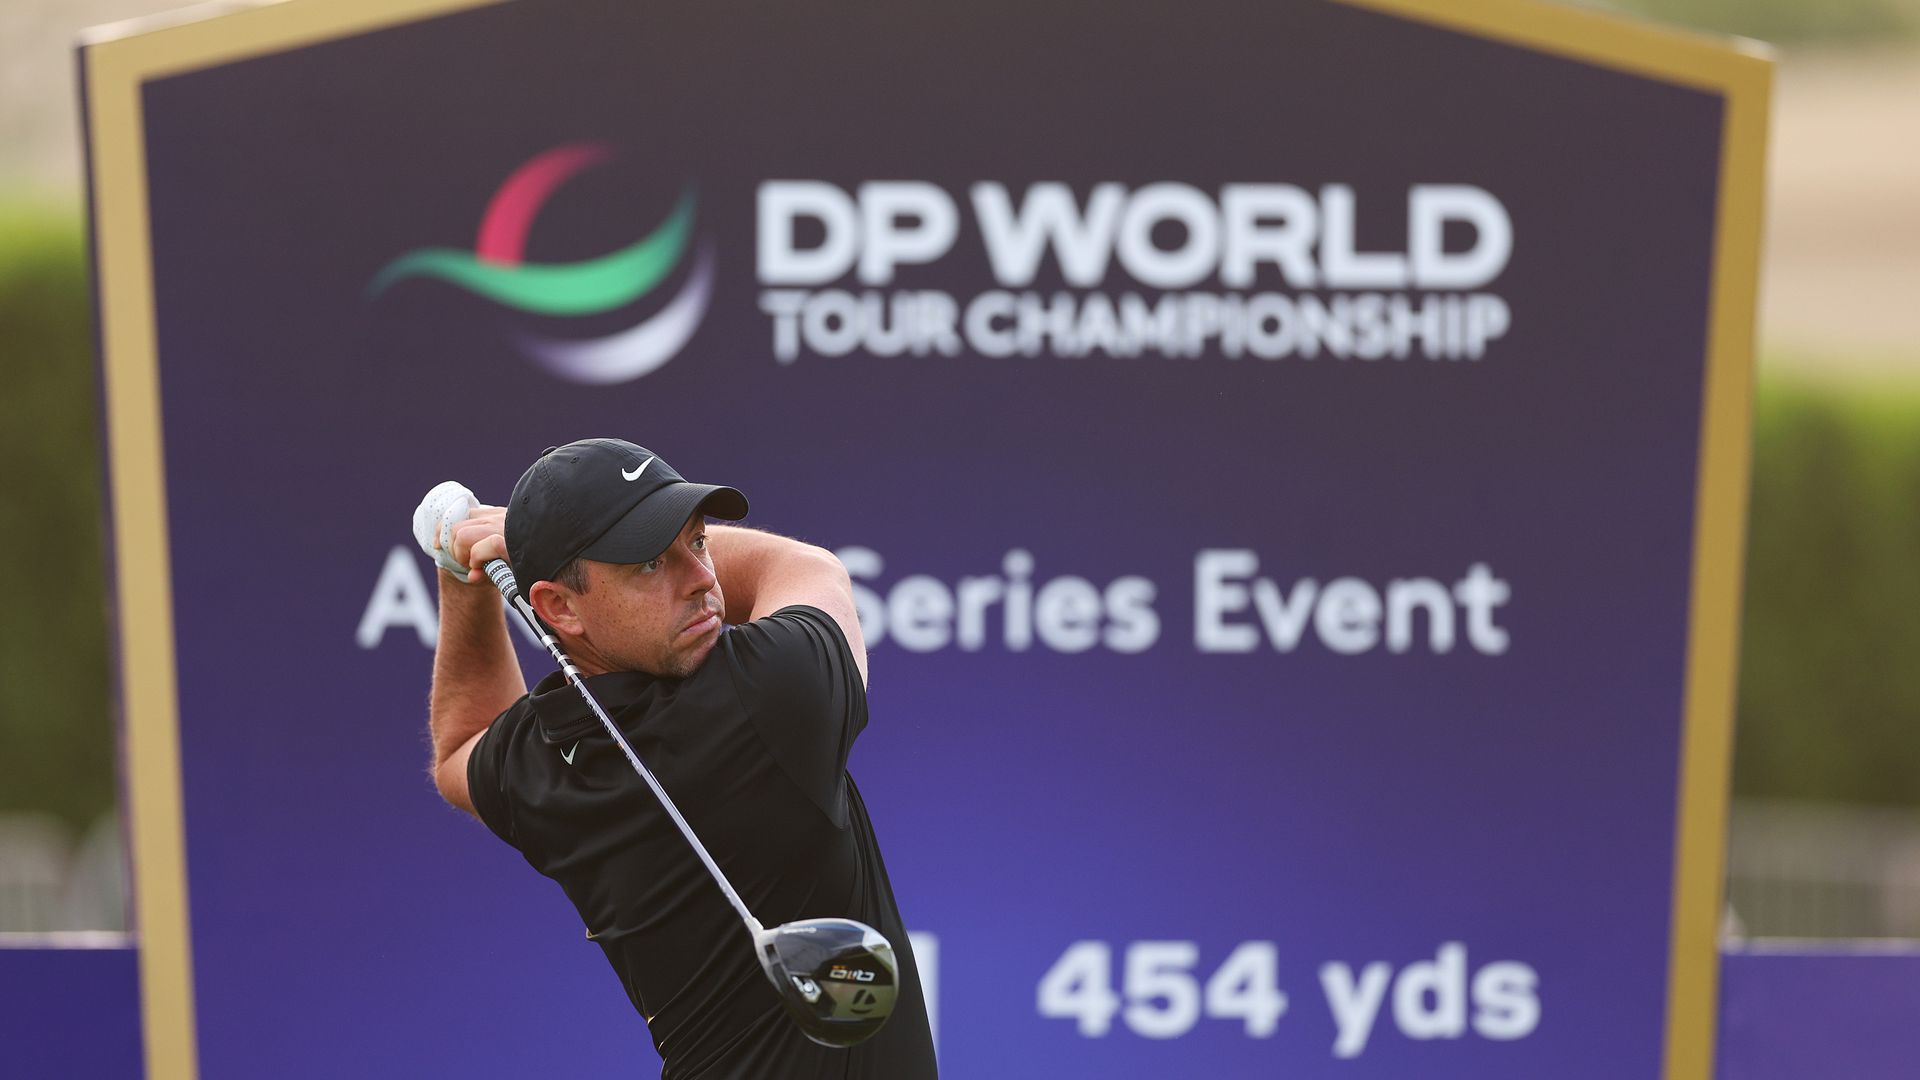 Rory McIlroy tees off on the first hole during the Pro-Am prior to the 2023 DP World Tour Championship.